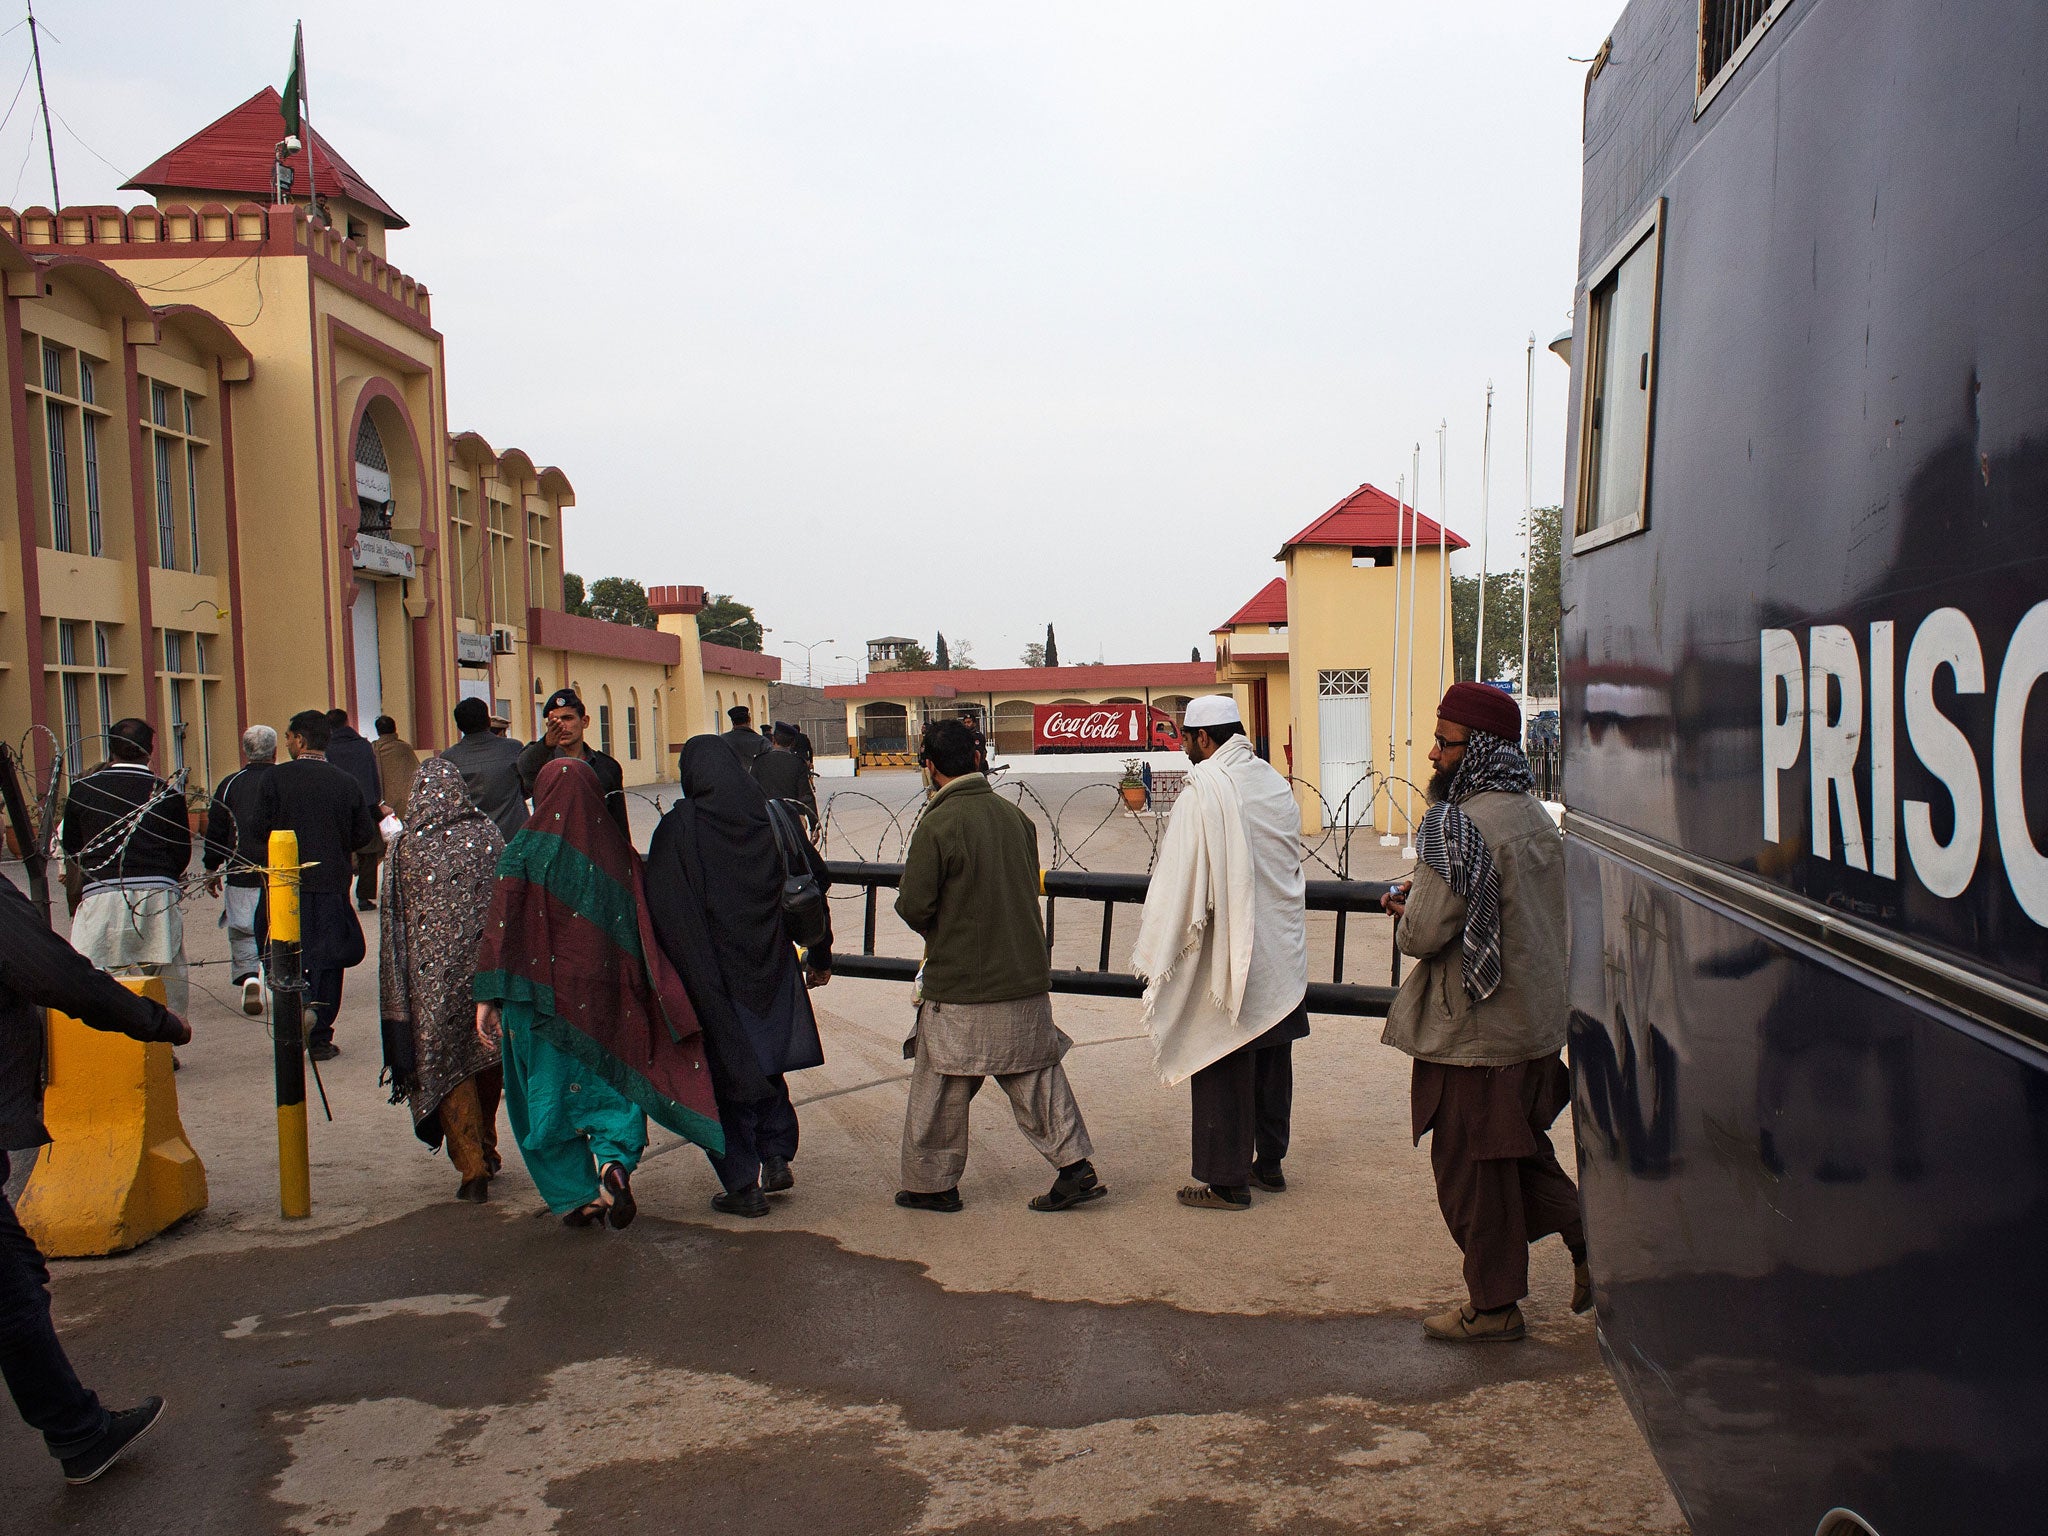 Prisoners are transferred from a van to the Rawalpindi central jail, where Mohmmad Asghar is being housed